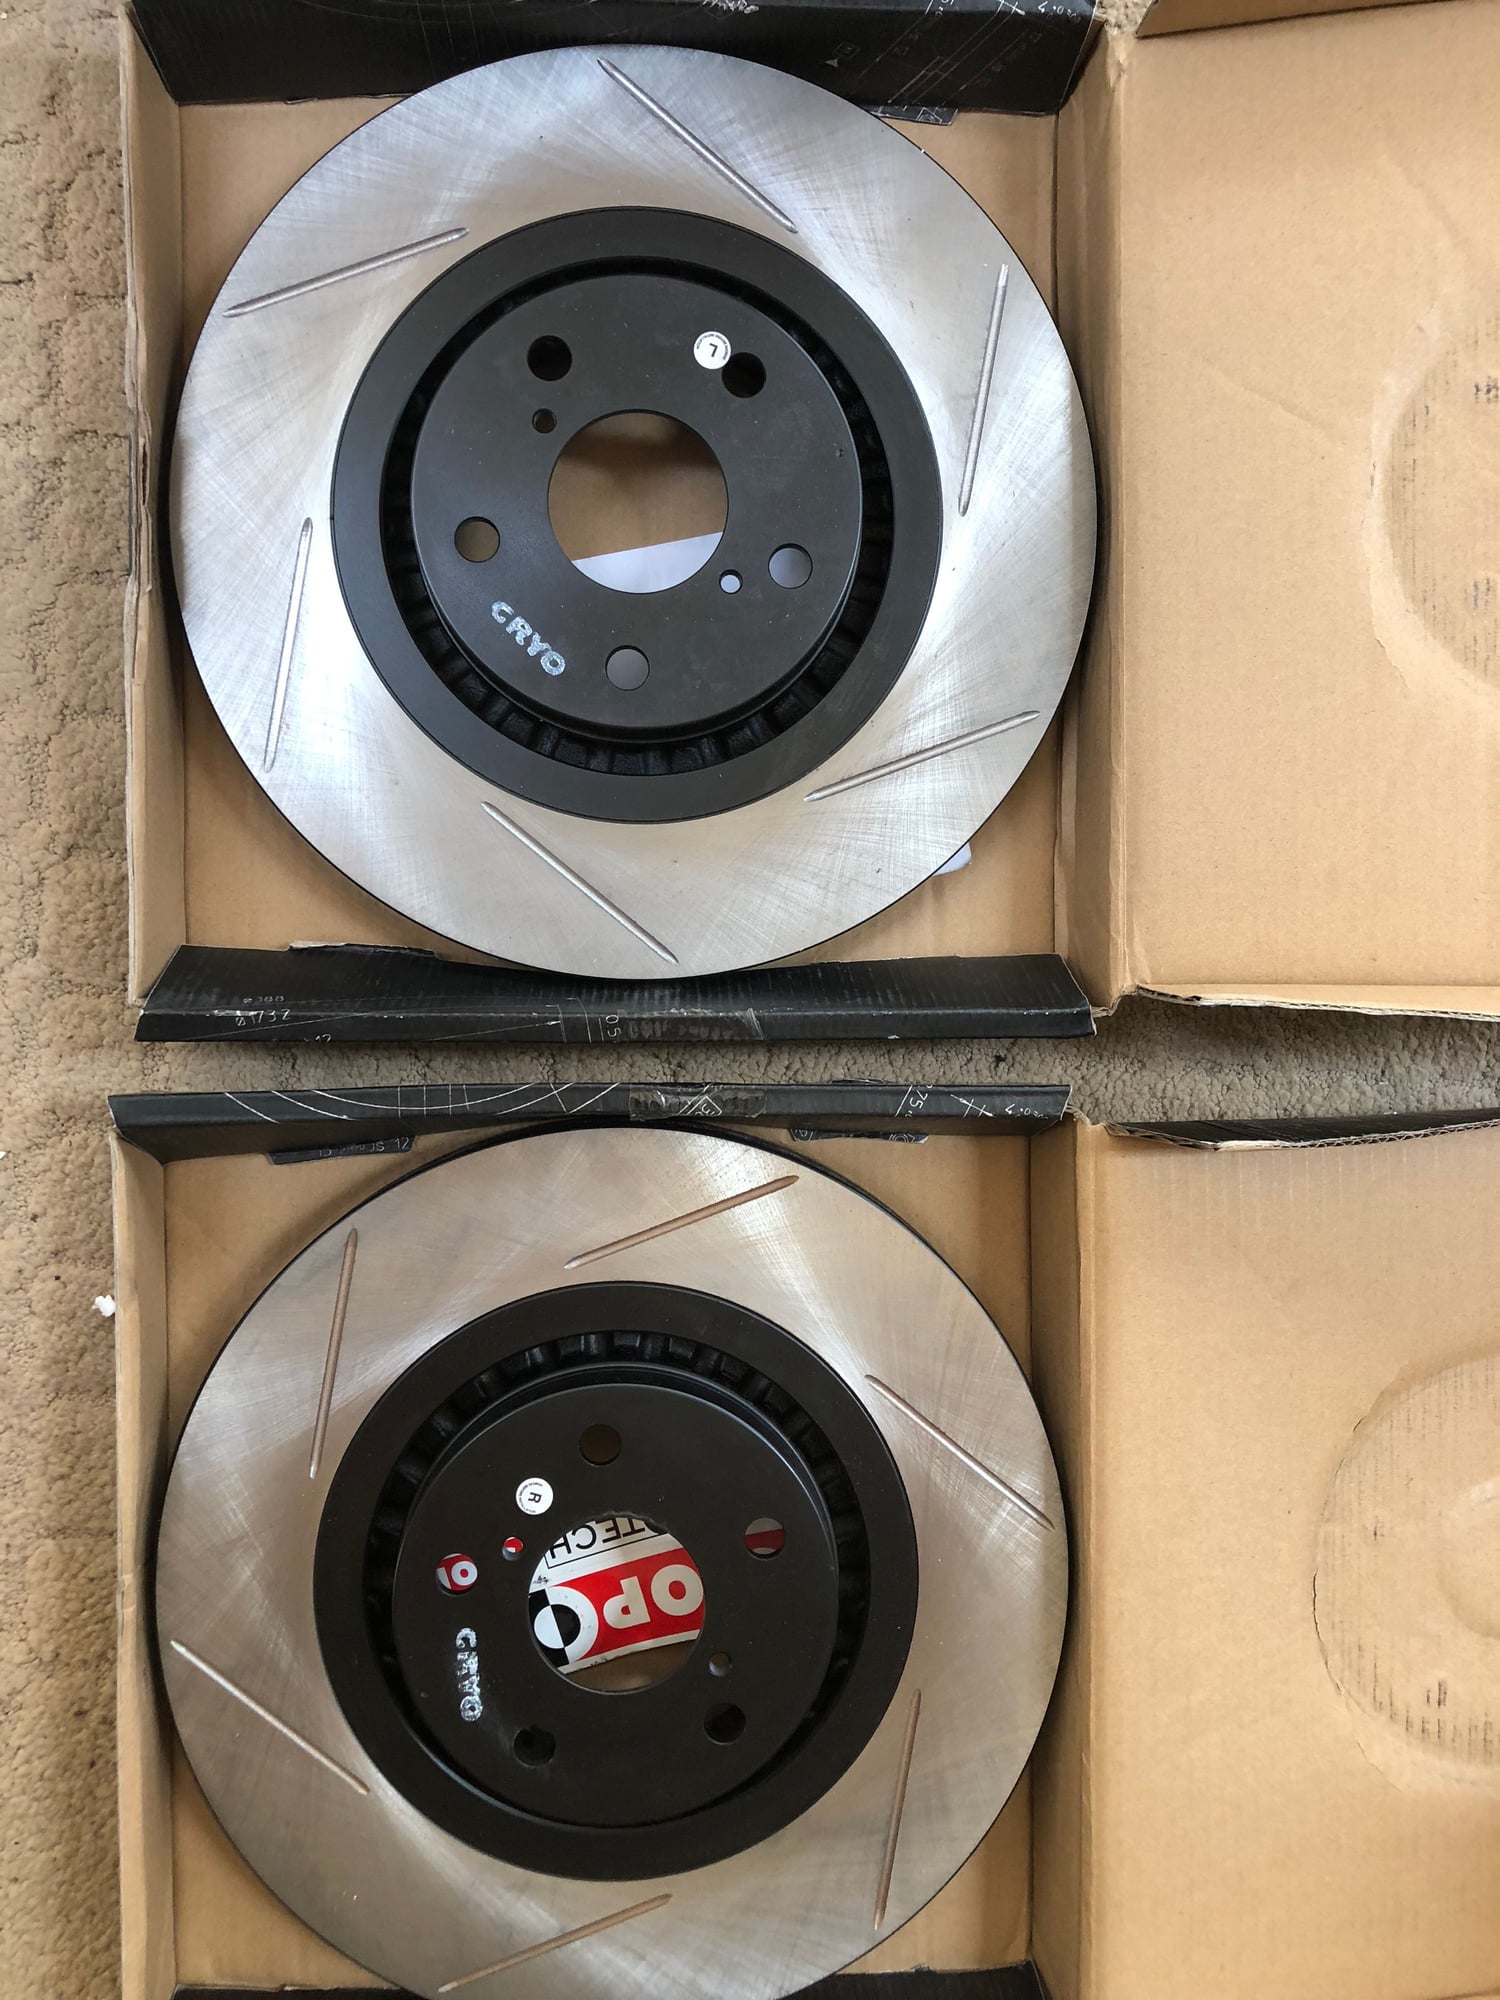 Brakes - Stoptech slotted CRYO treated rotors brand new in the box!! - New - 2006 to 2017 Lexus IS350 - 2014 to 2017 Lexus RC350 - 2005 to 2011 Lexus GS350 - 2012 to 2017 Lexus GS350 - Schaumburg, IL 60195, United States